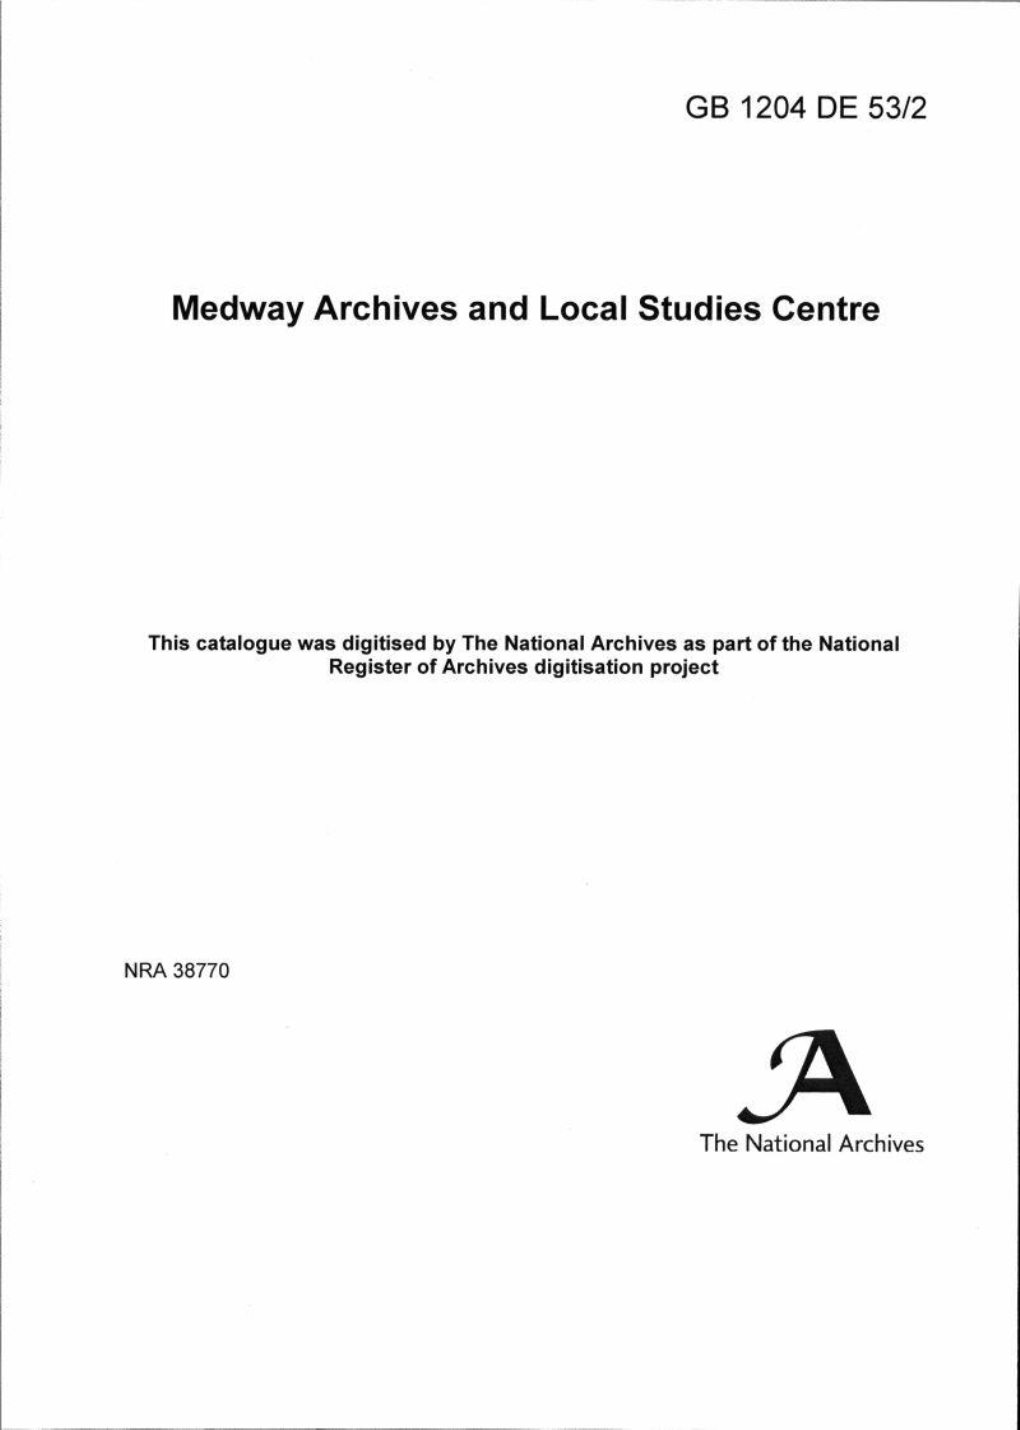 Medway Archives and Local Studies Centre